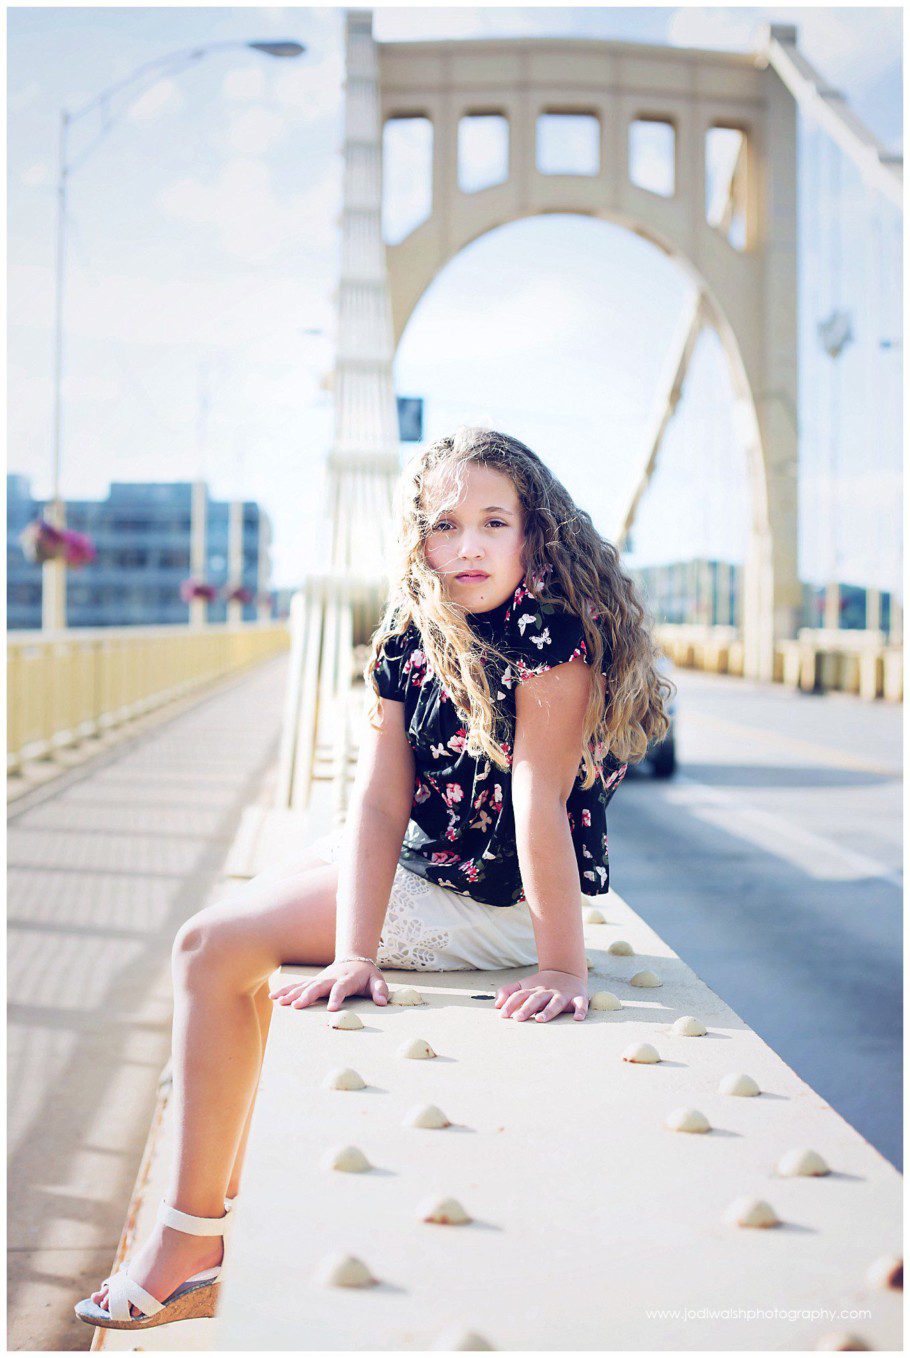 Image of a teen portrait by Jodi Walsh Photography. the image shows a teen girl with curly hair, sitting on the yellow metal beam of the Rachel Carson Bridge in Pittsburgh. The wind is blowing her hair slightly and she has a serious look.